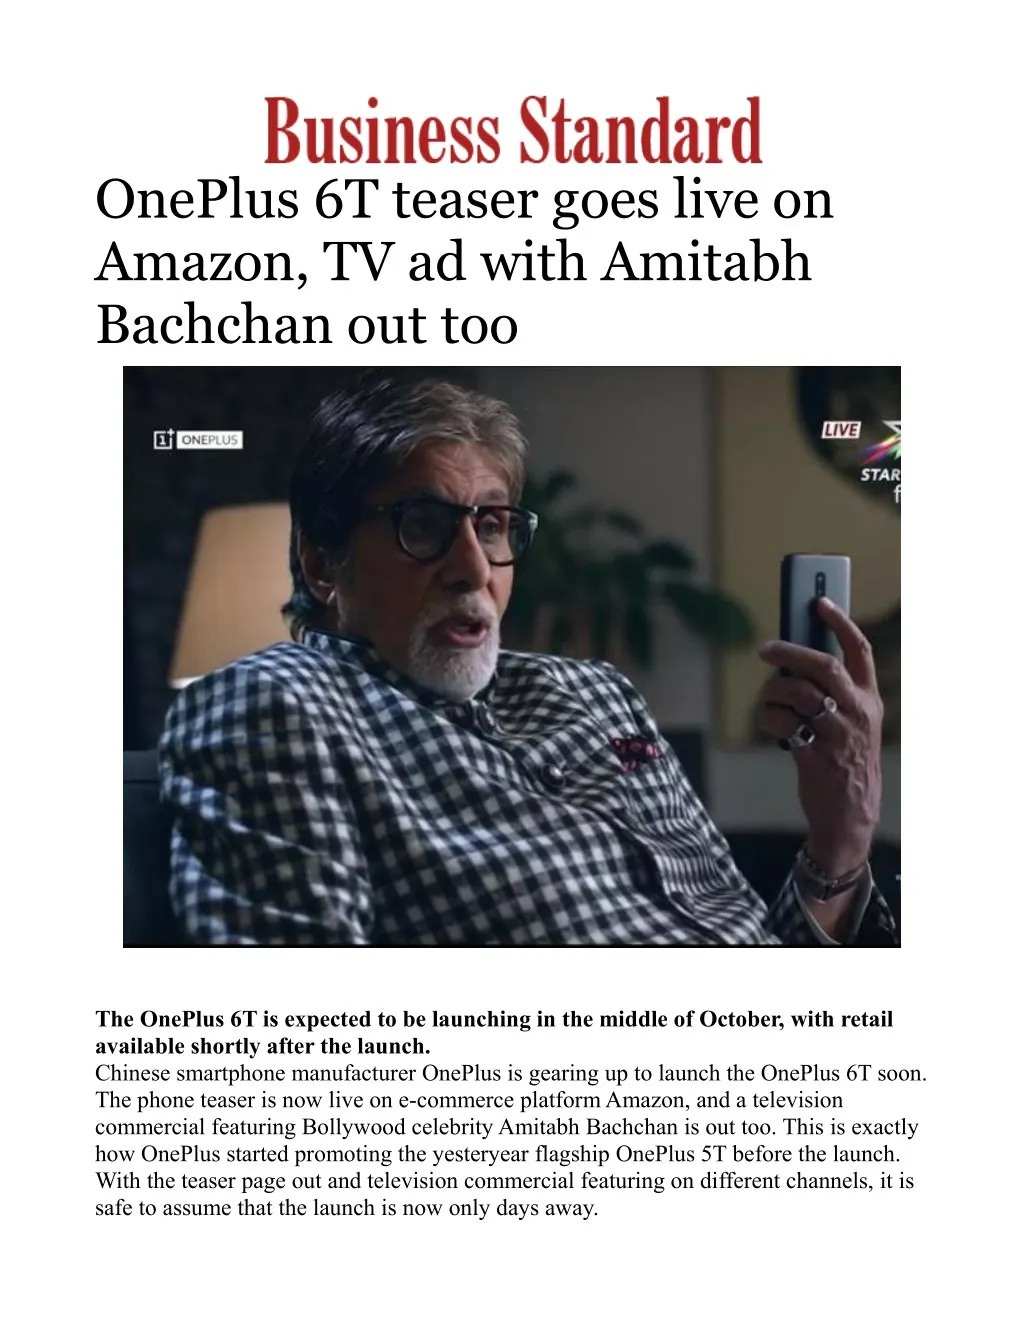 oneplus 6t teaser goes live on amazon tv ad with